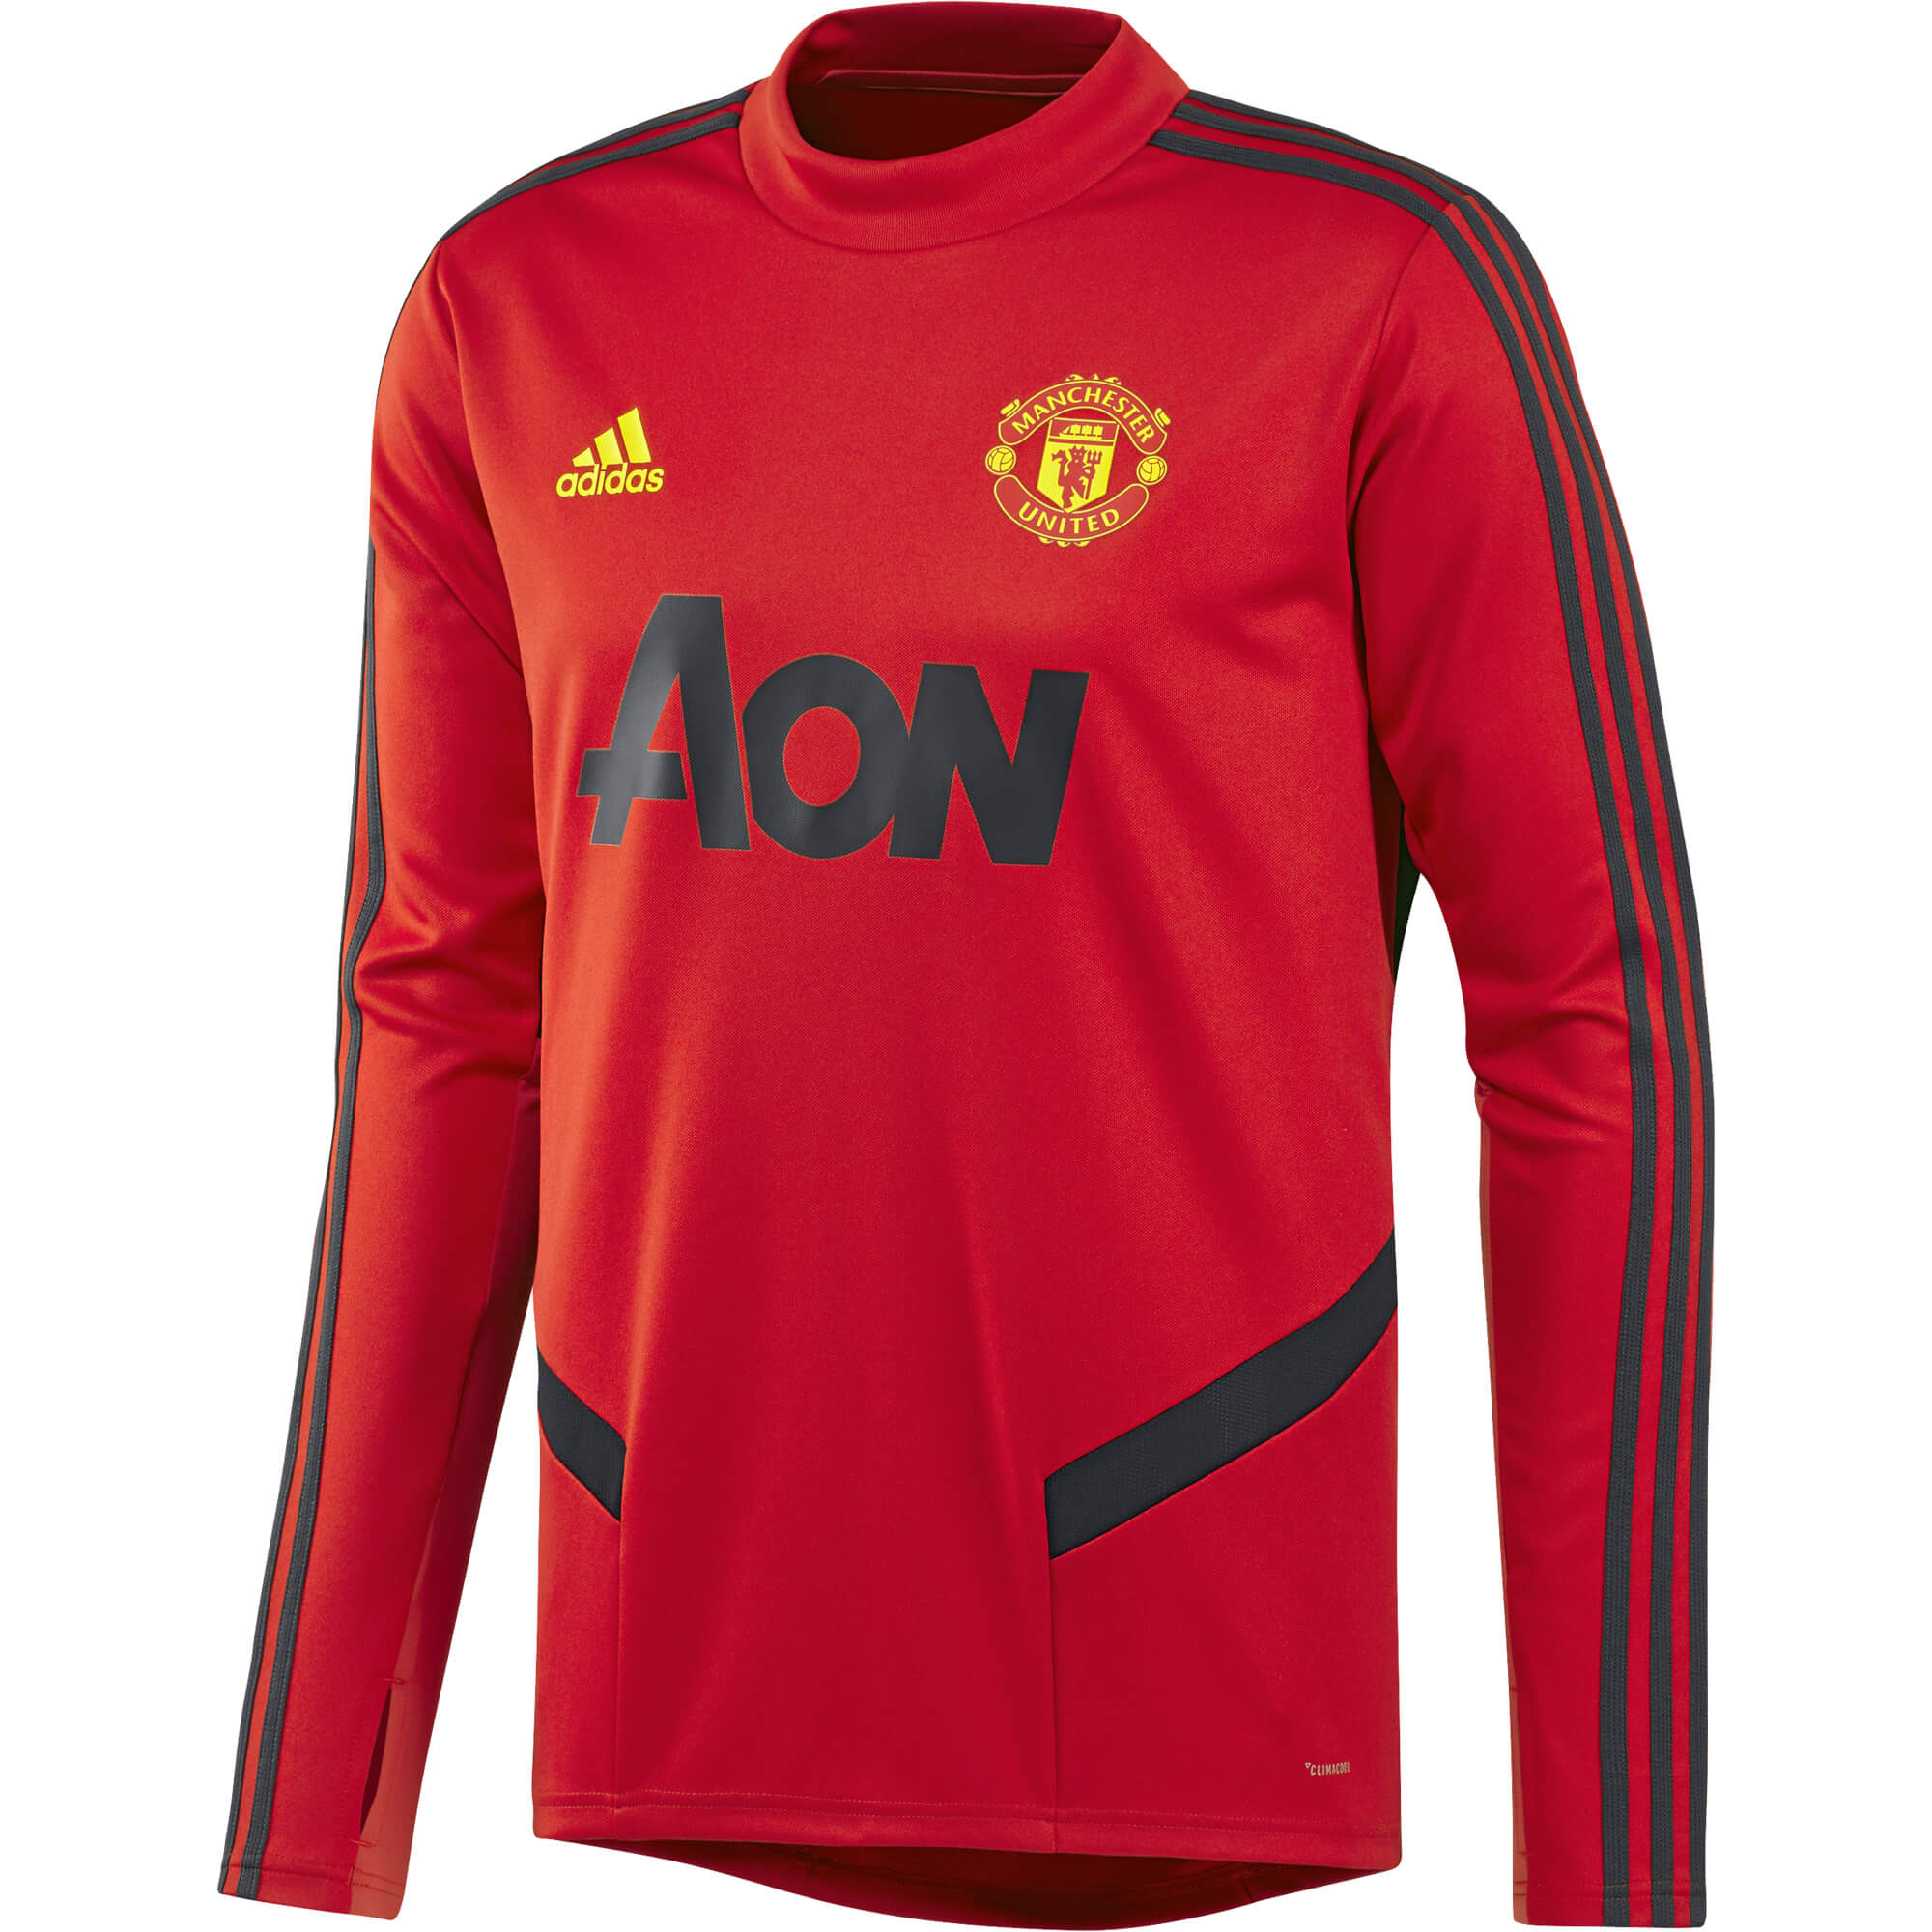 ADIDAS MANCHESTER UNITED TRG TOP JUNIOR ROUGE 2019/2020